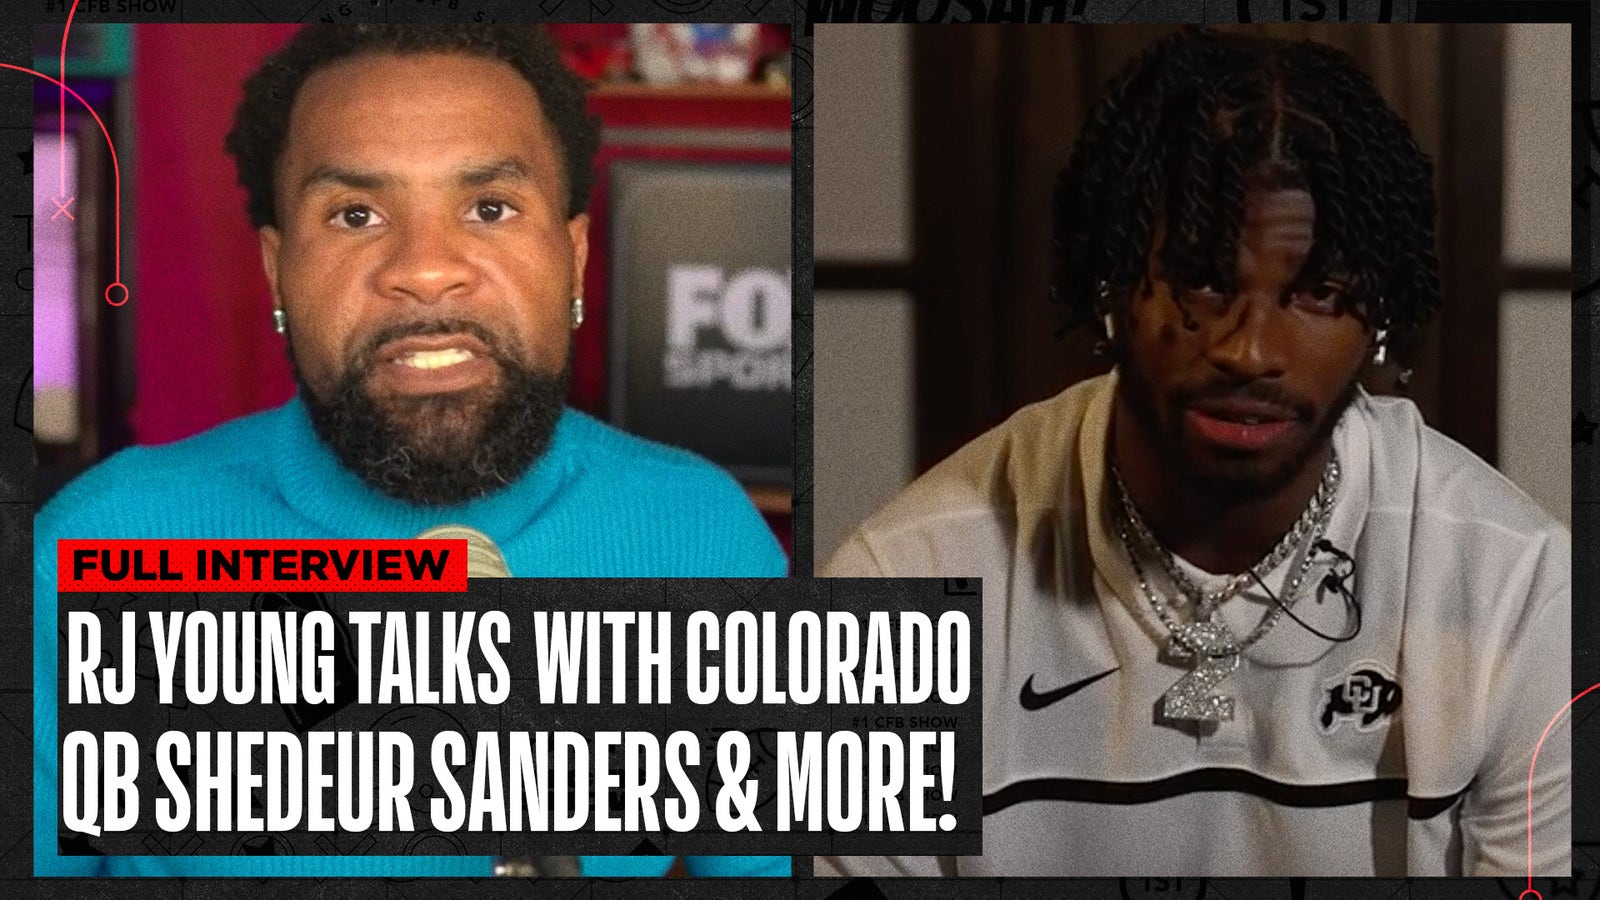 Colorado's Shedeur Sanders, Travis Hunter and Charles Kelly join RJ Young